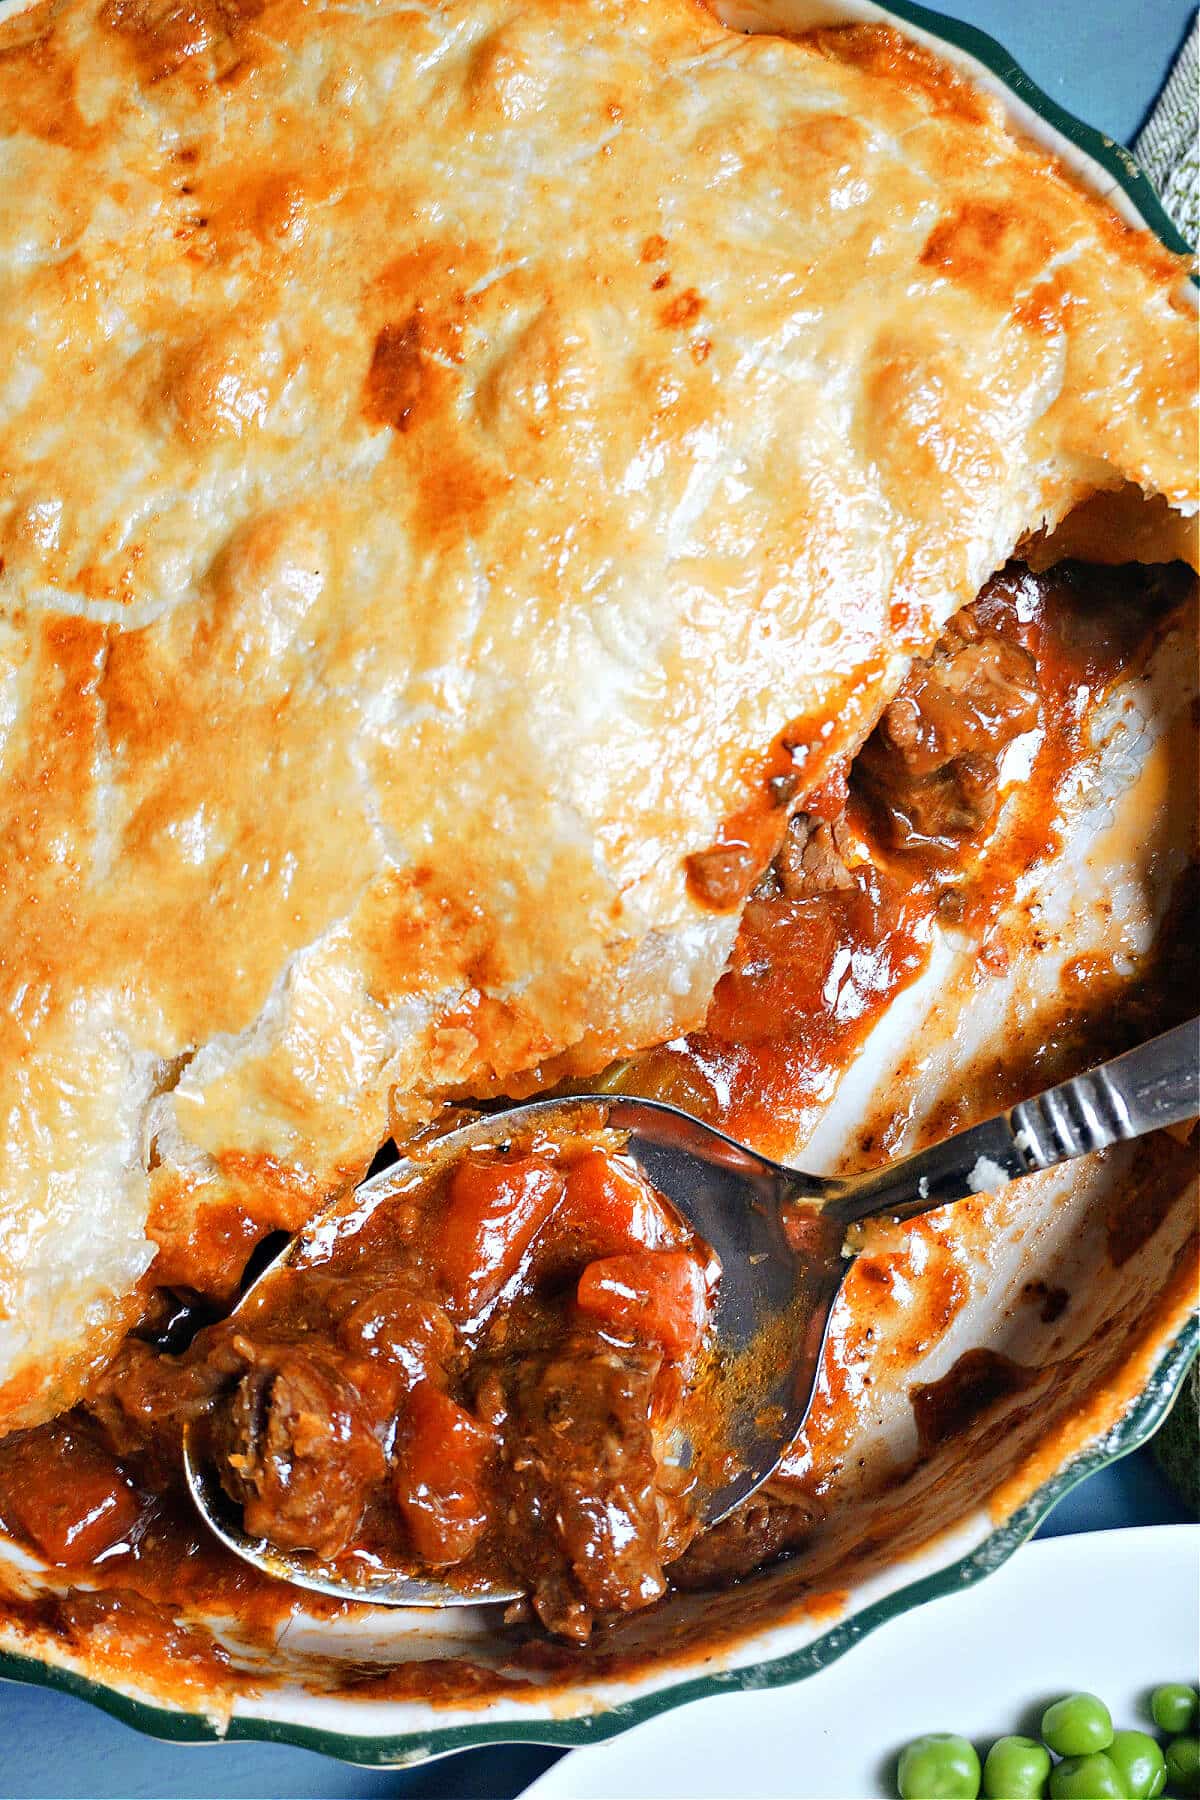 Close-up shoot of a beef pie.